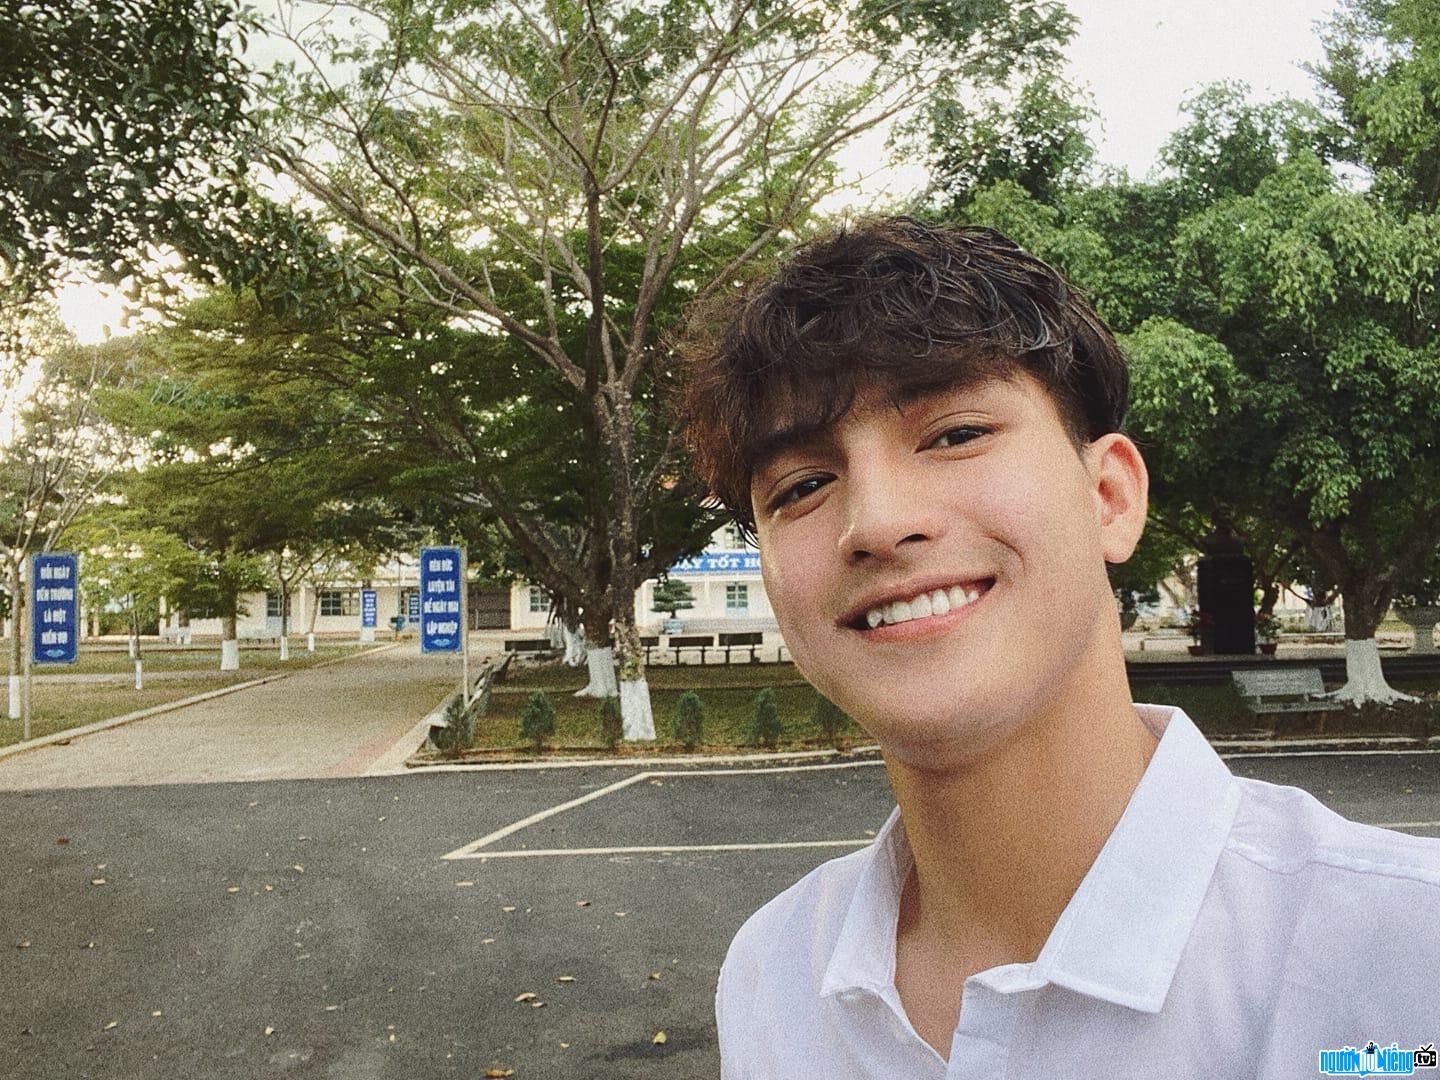  handsome Quoc Trung with a sunny smile